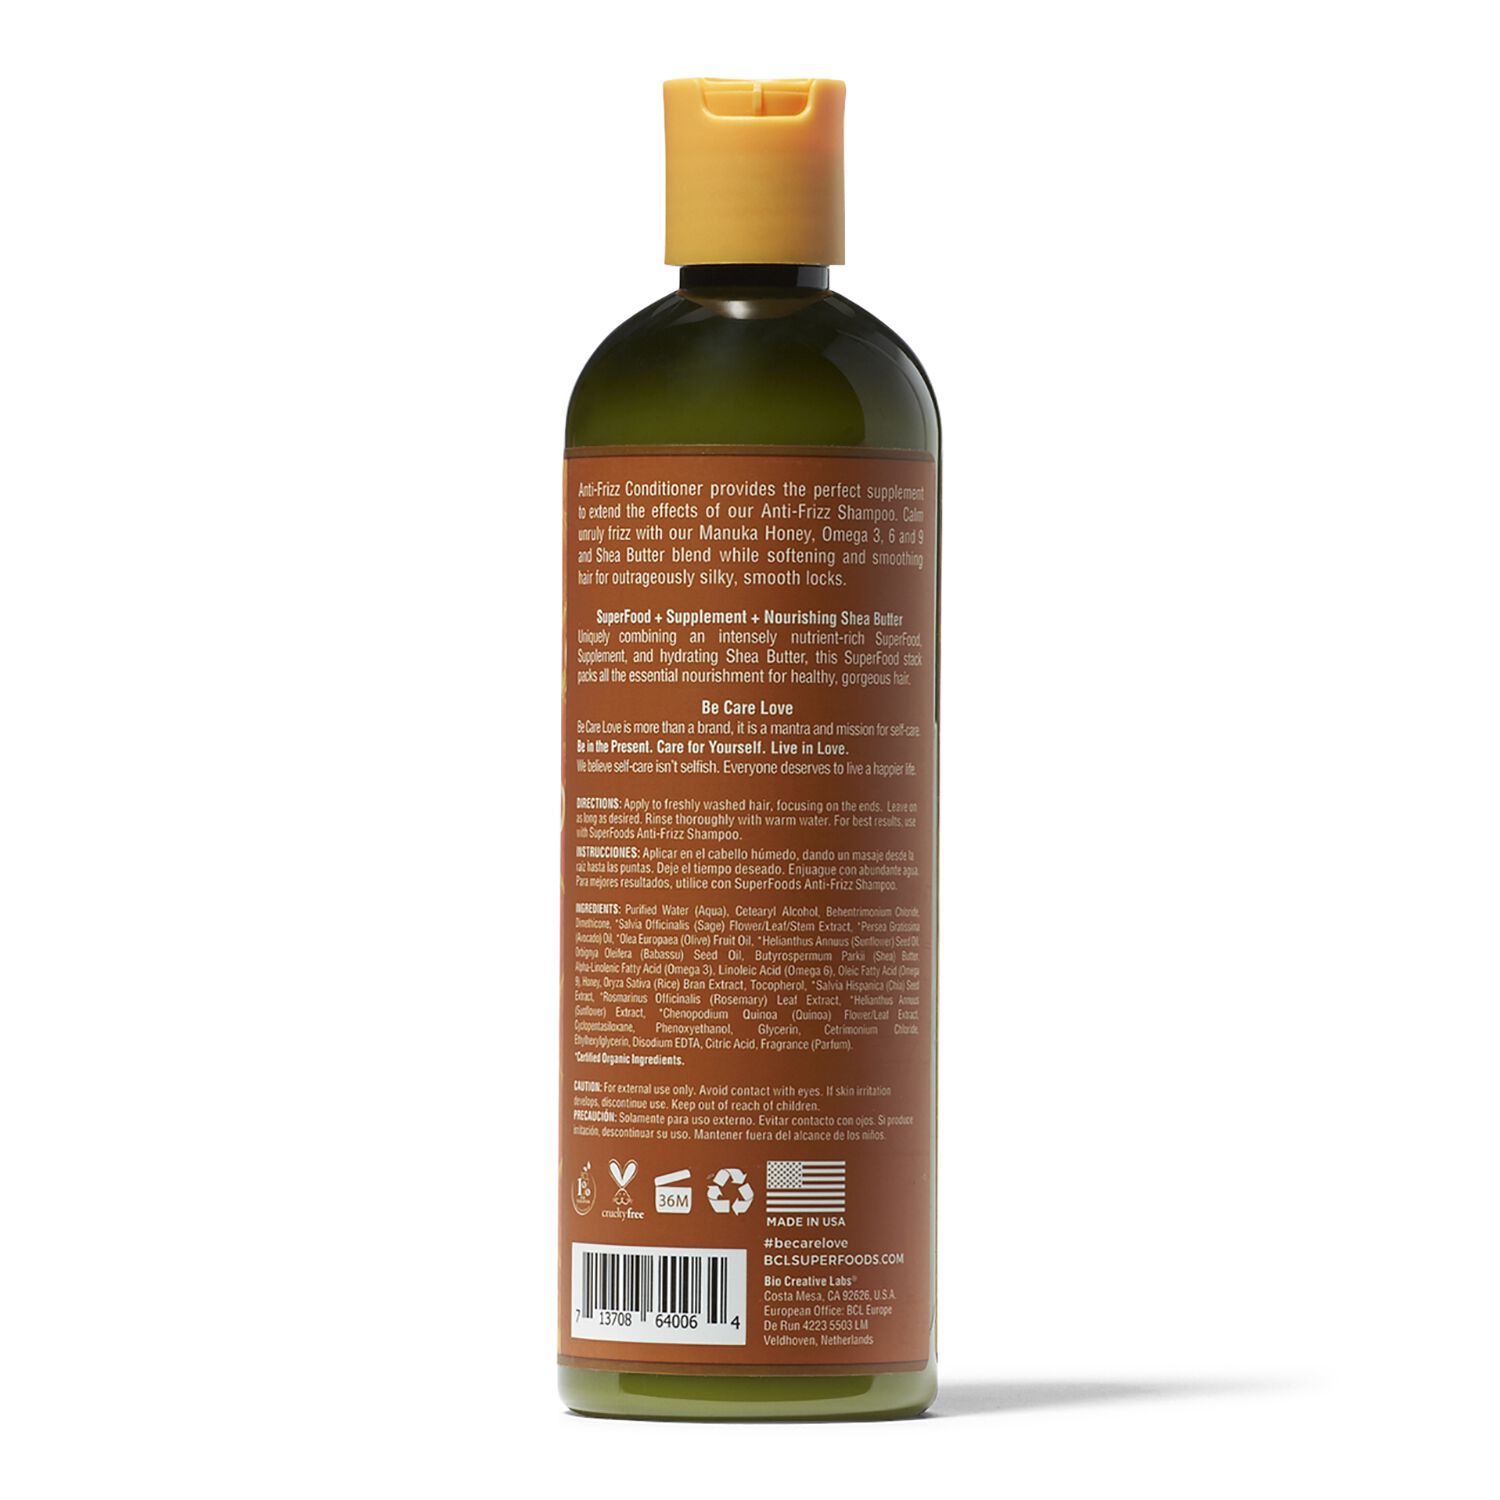 Superfoods Anti Frizz Conditioner by Bio Creative Labs/Be Care Love ...